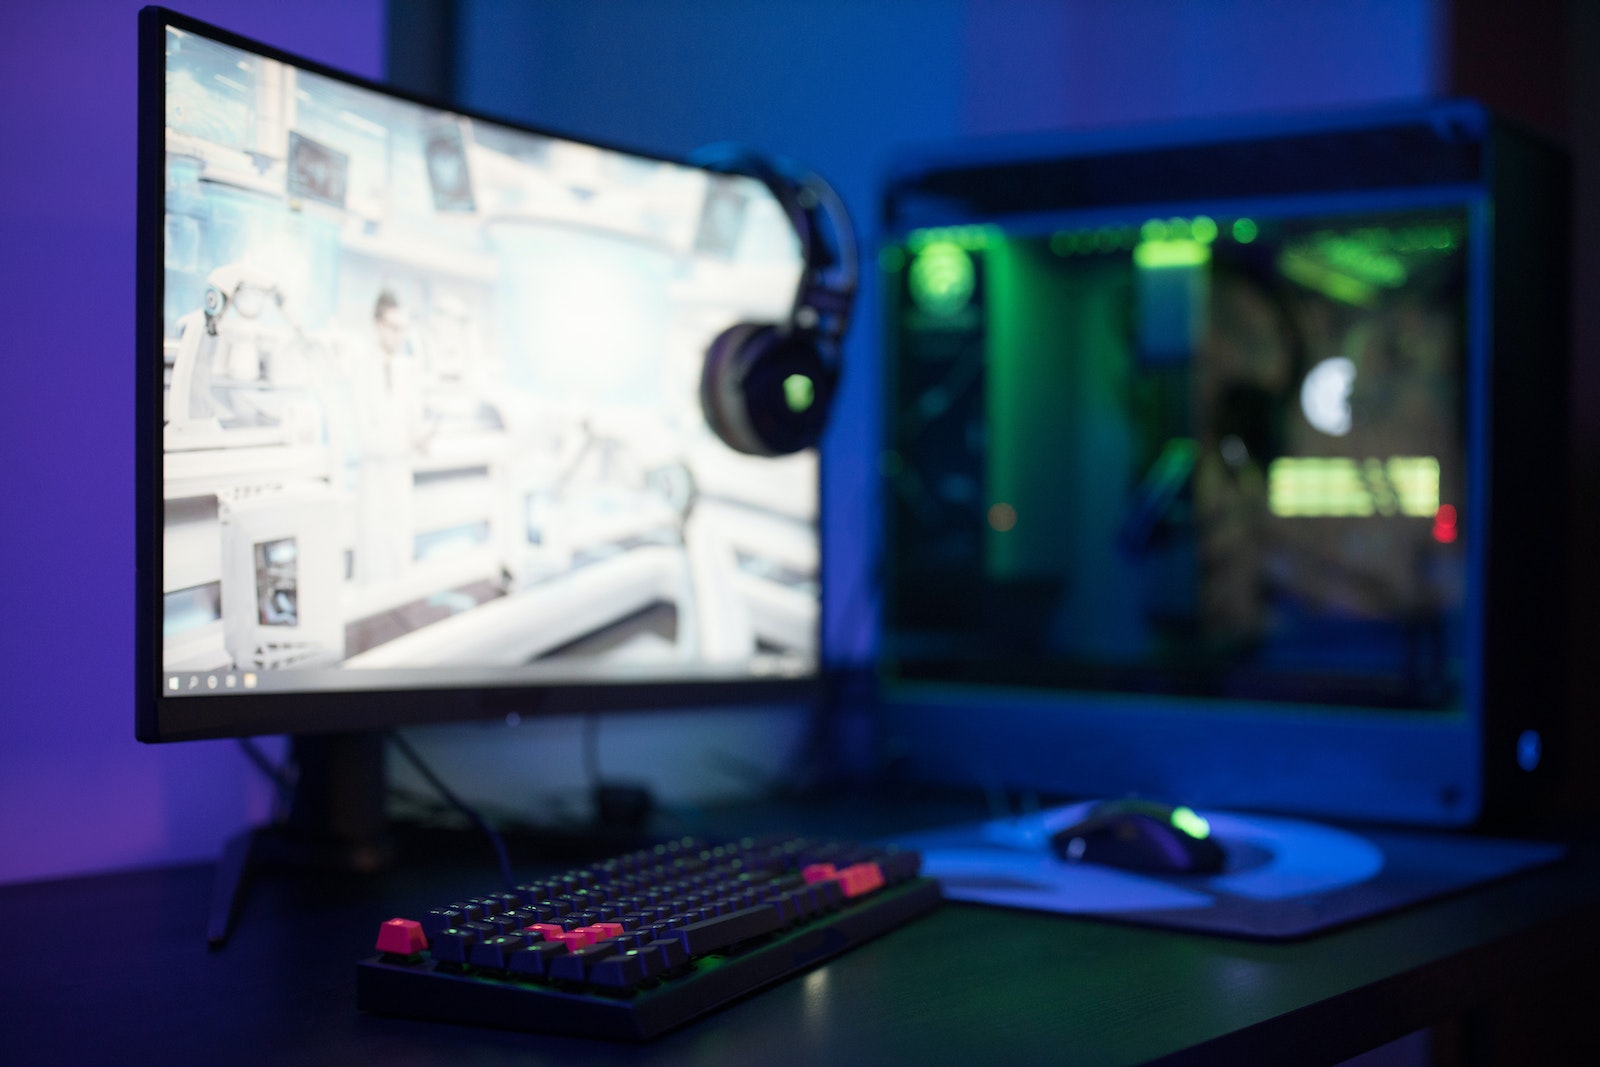 What Makes a Gaming Monitor Different from a Regular Monitor?